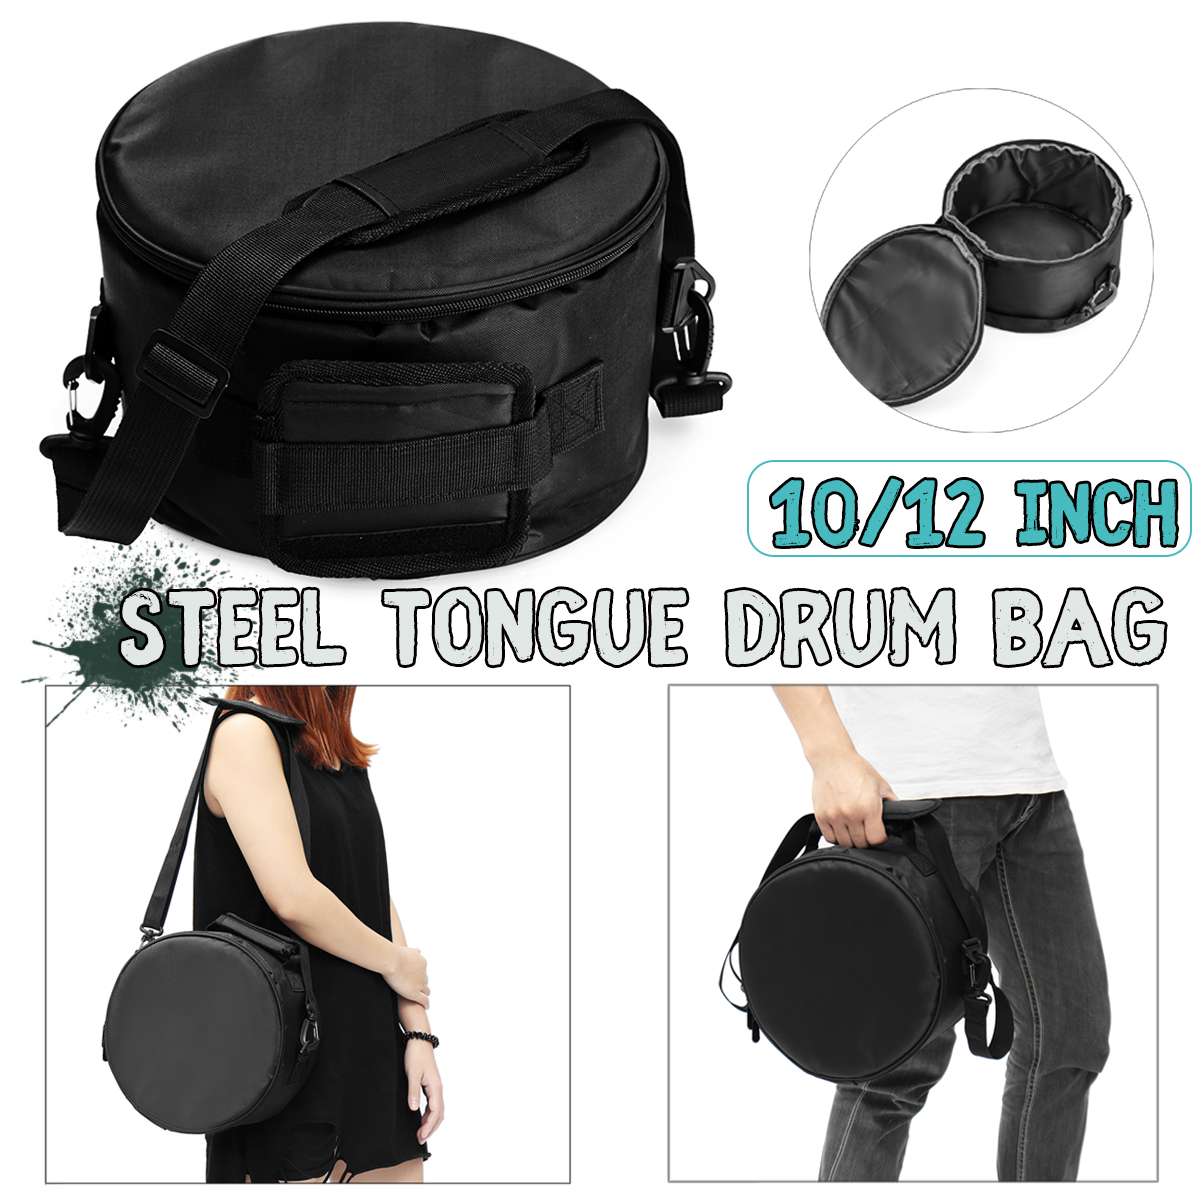 Steel-Tongue-Drum-Bag-Storage-Punch-Soulder-Crossbody-Bag-For-Outdoor-Camping-Leisure-Wear-1357124-1